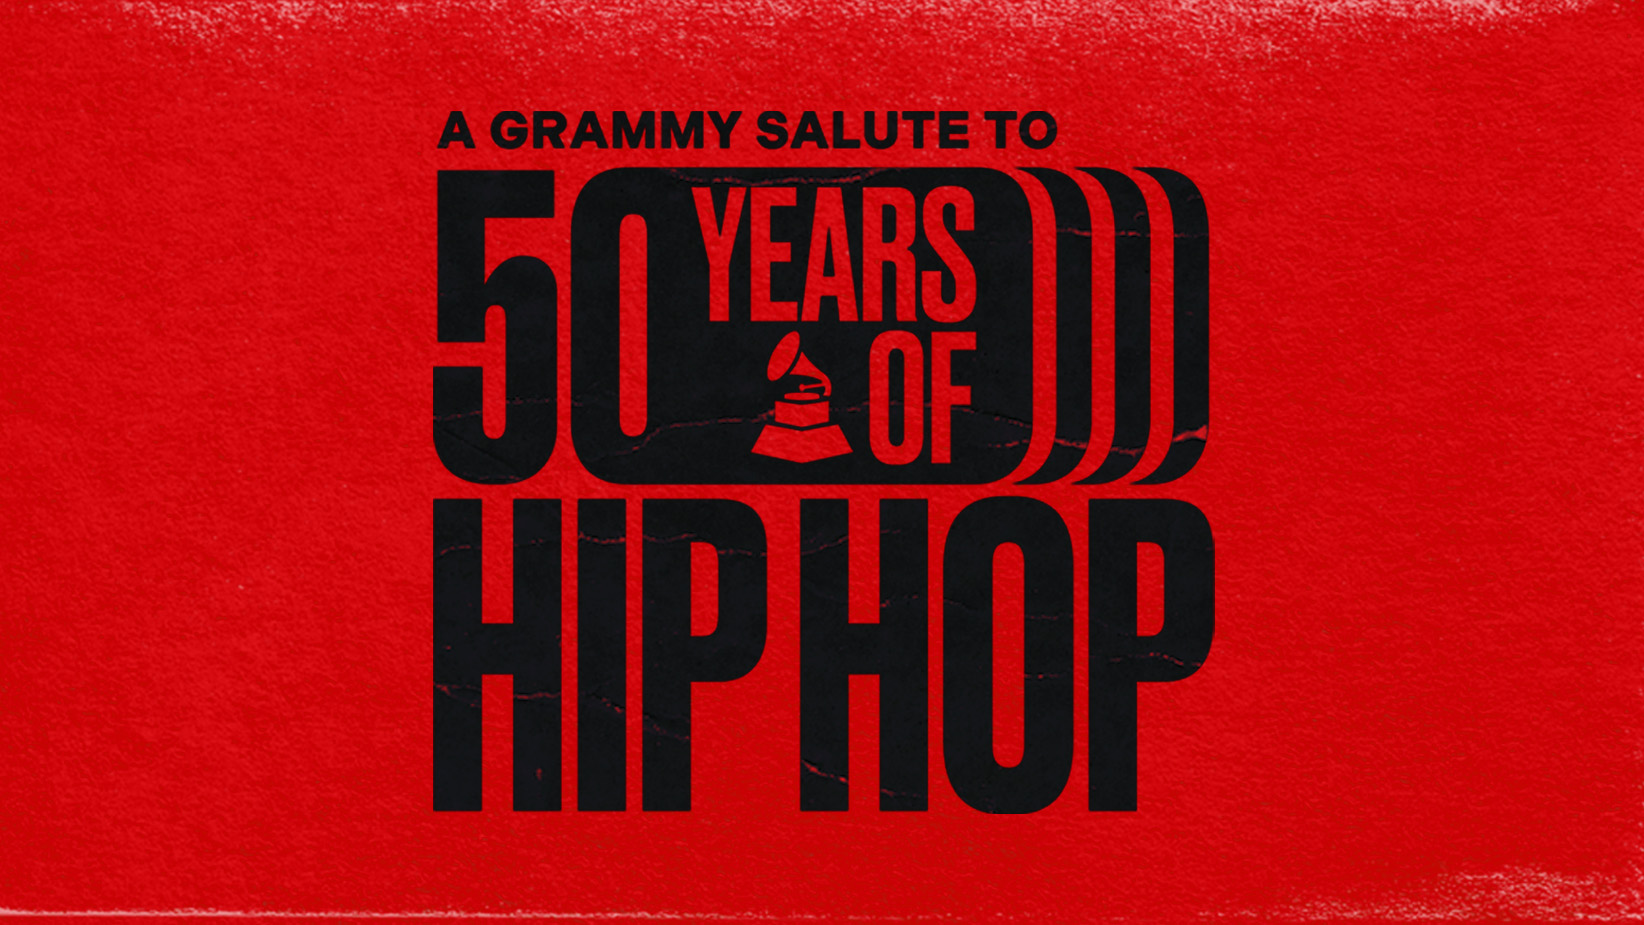 MC Lyte Discusses Hip-Hop's Impact On Global Culture At "A GRAMMY Salute To 50 Years Of Hip-Hop"